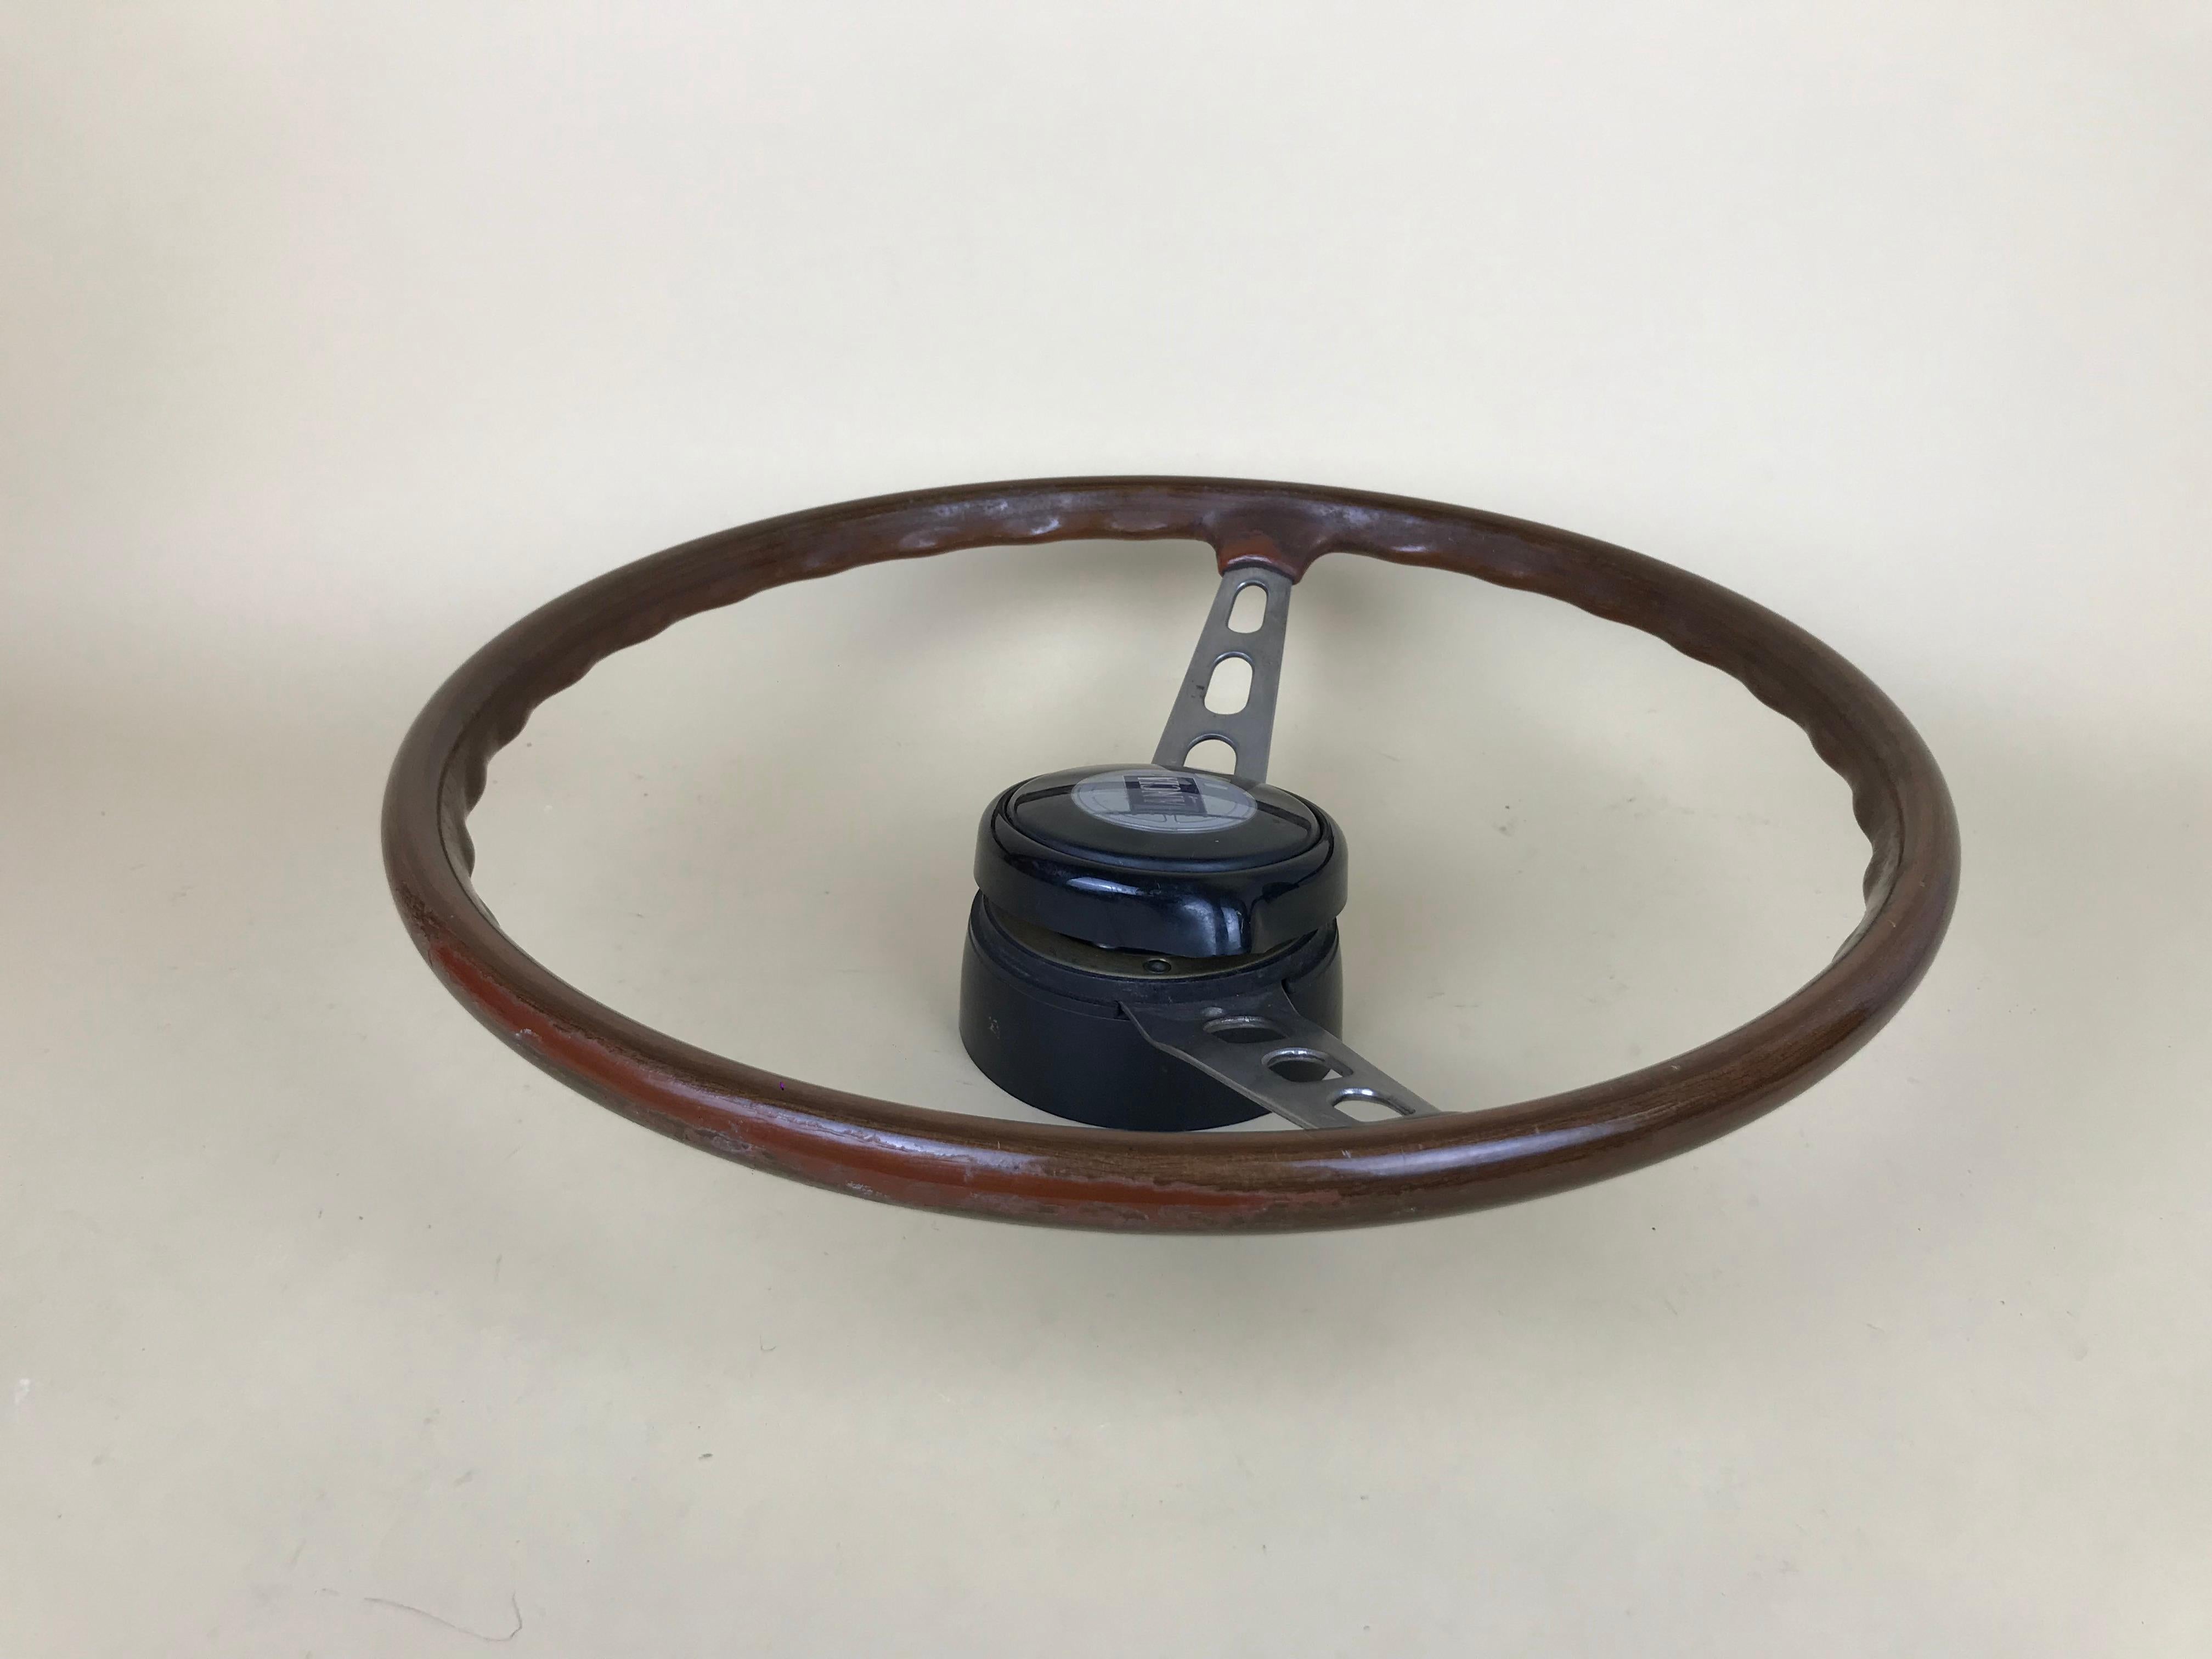 1960s Vintage Wooden and Metal Lancia Steering Wheel Made in Italy For Sale 2